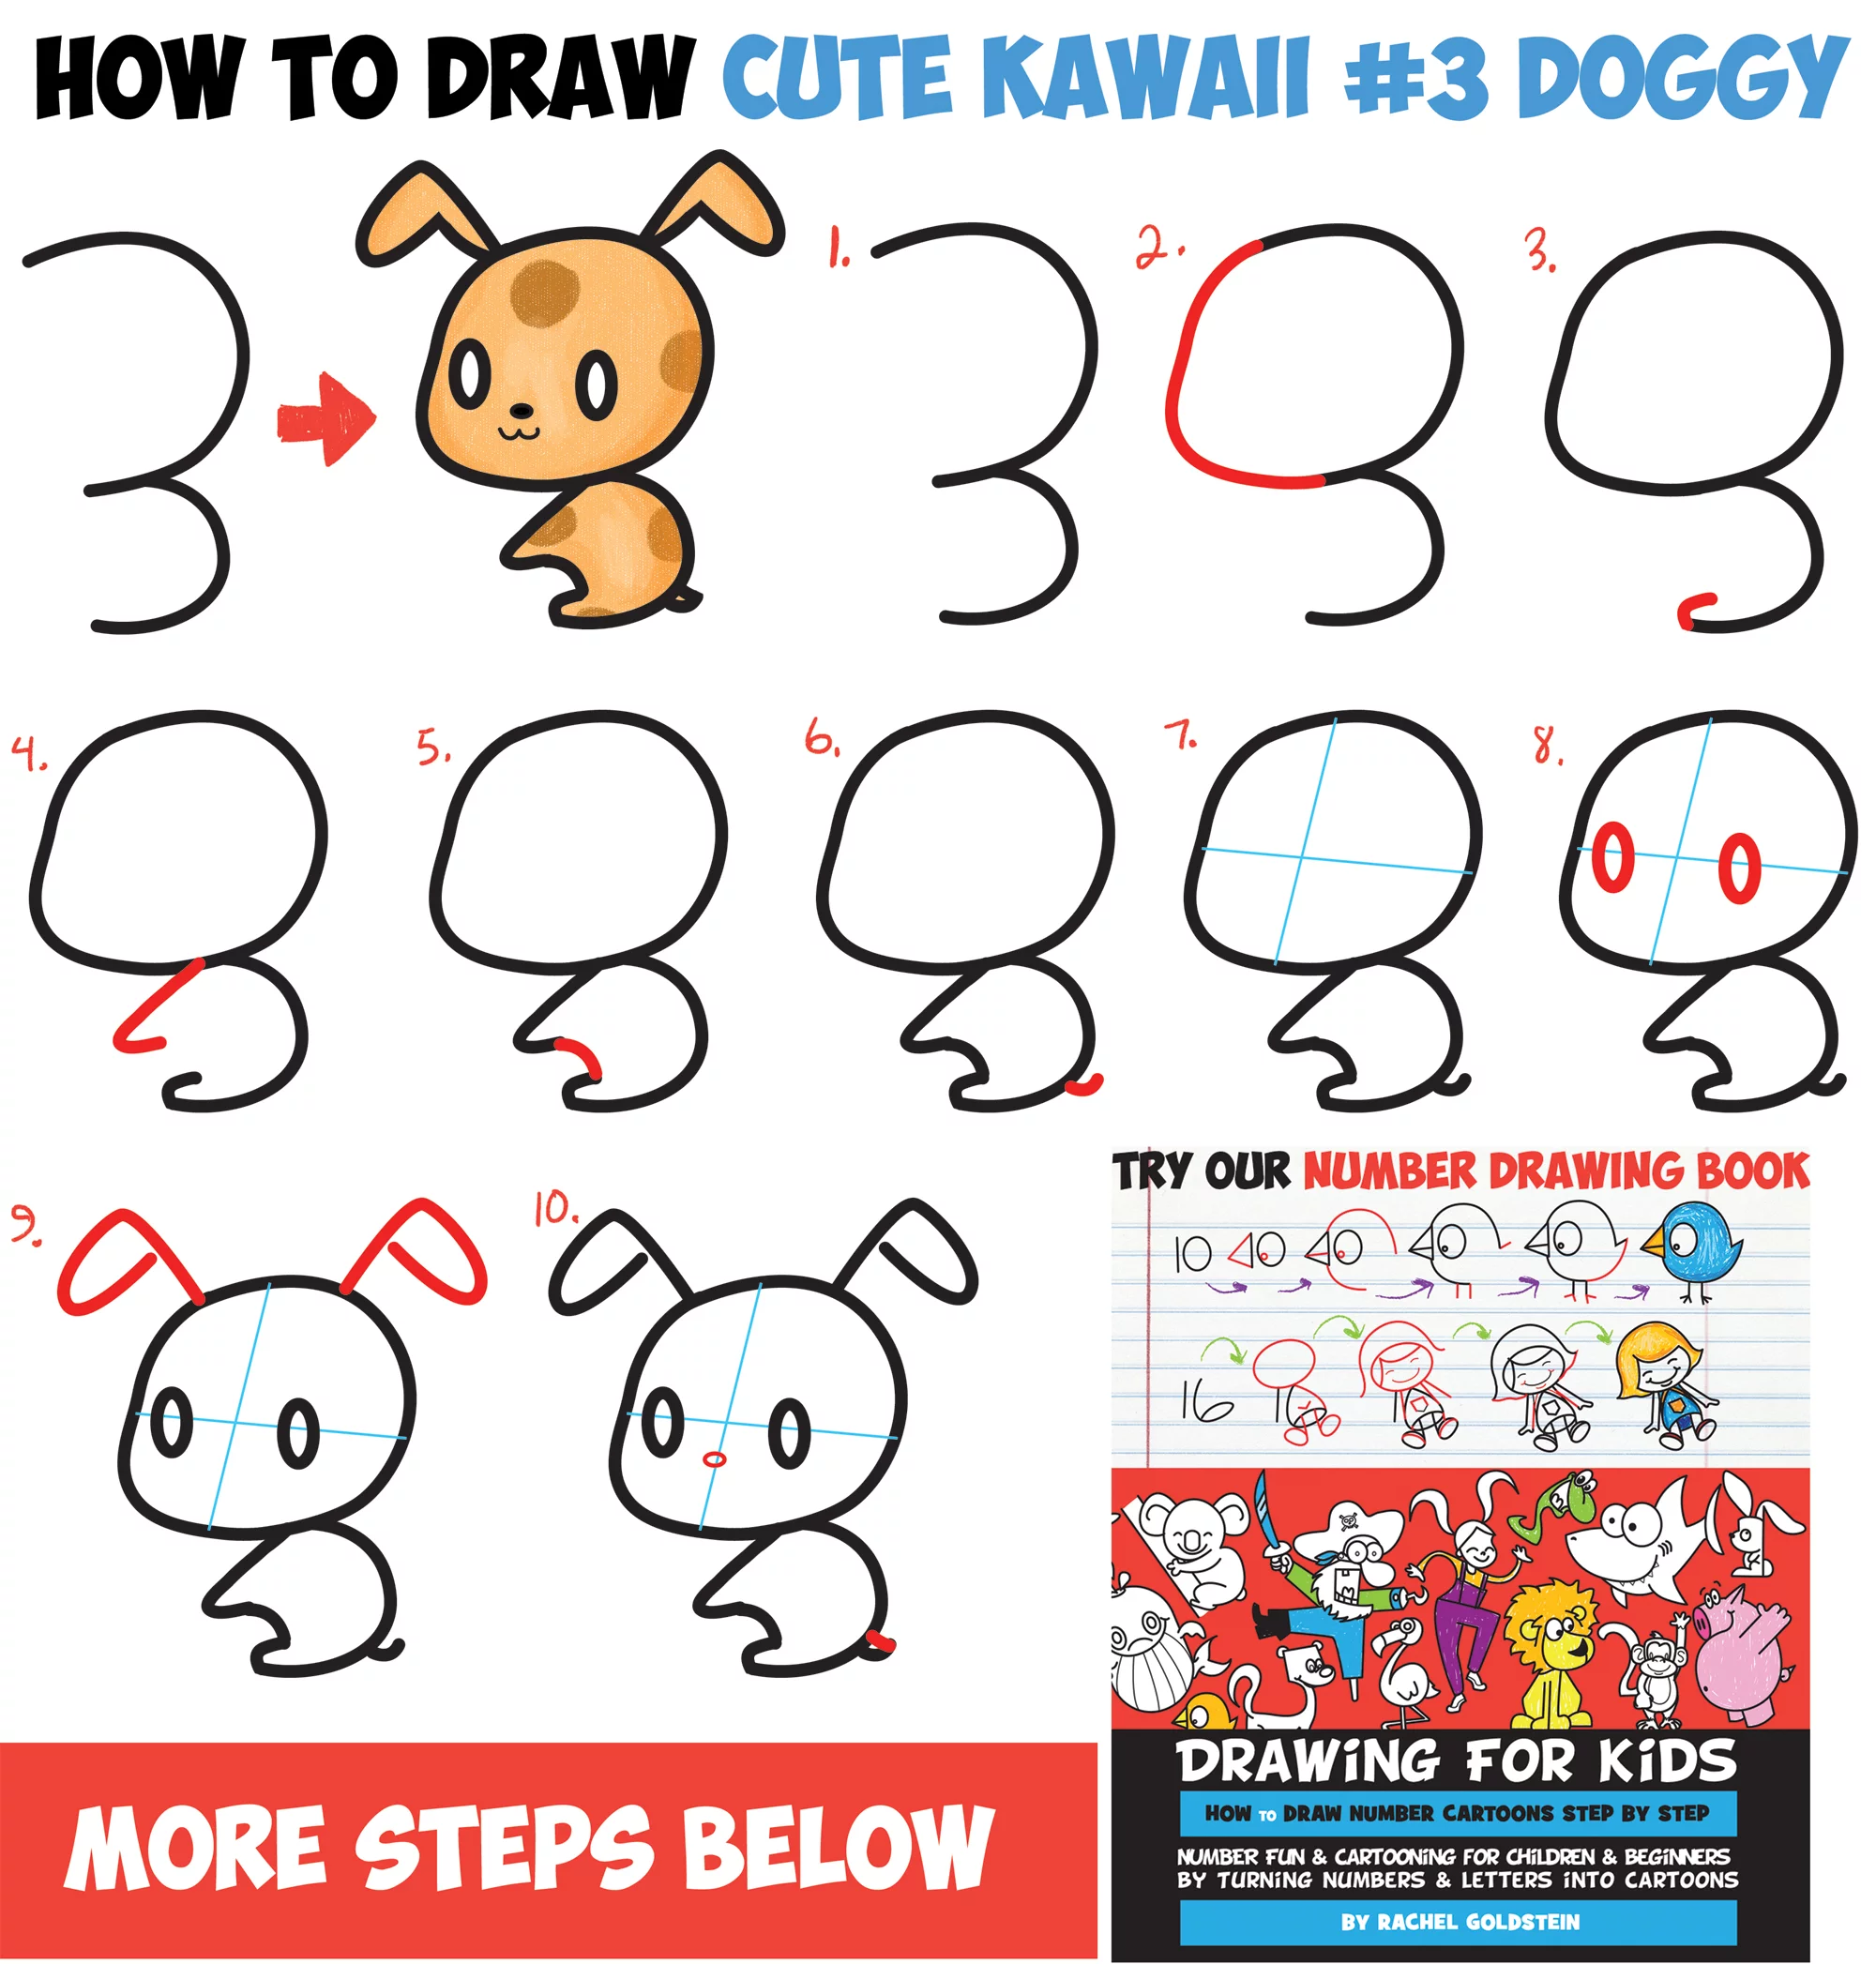 How to Draw Cute Chibi / Kawaii Characters with Number 3 Shapes - Easy Step  by Step Drawing Tutorial for Kids and Beginners - How to Draw Step by Step  Drawing Tutorials